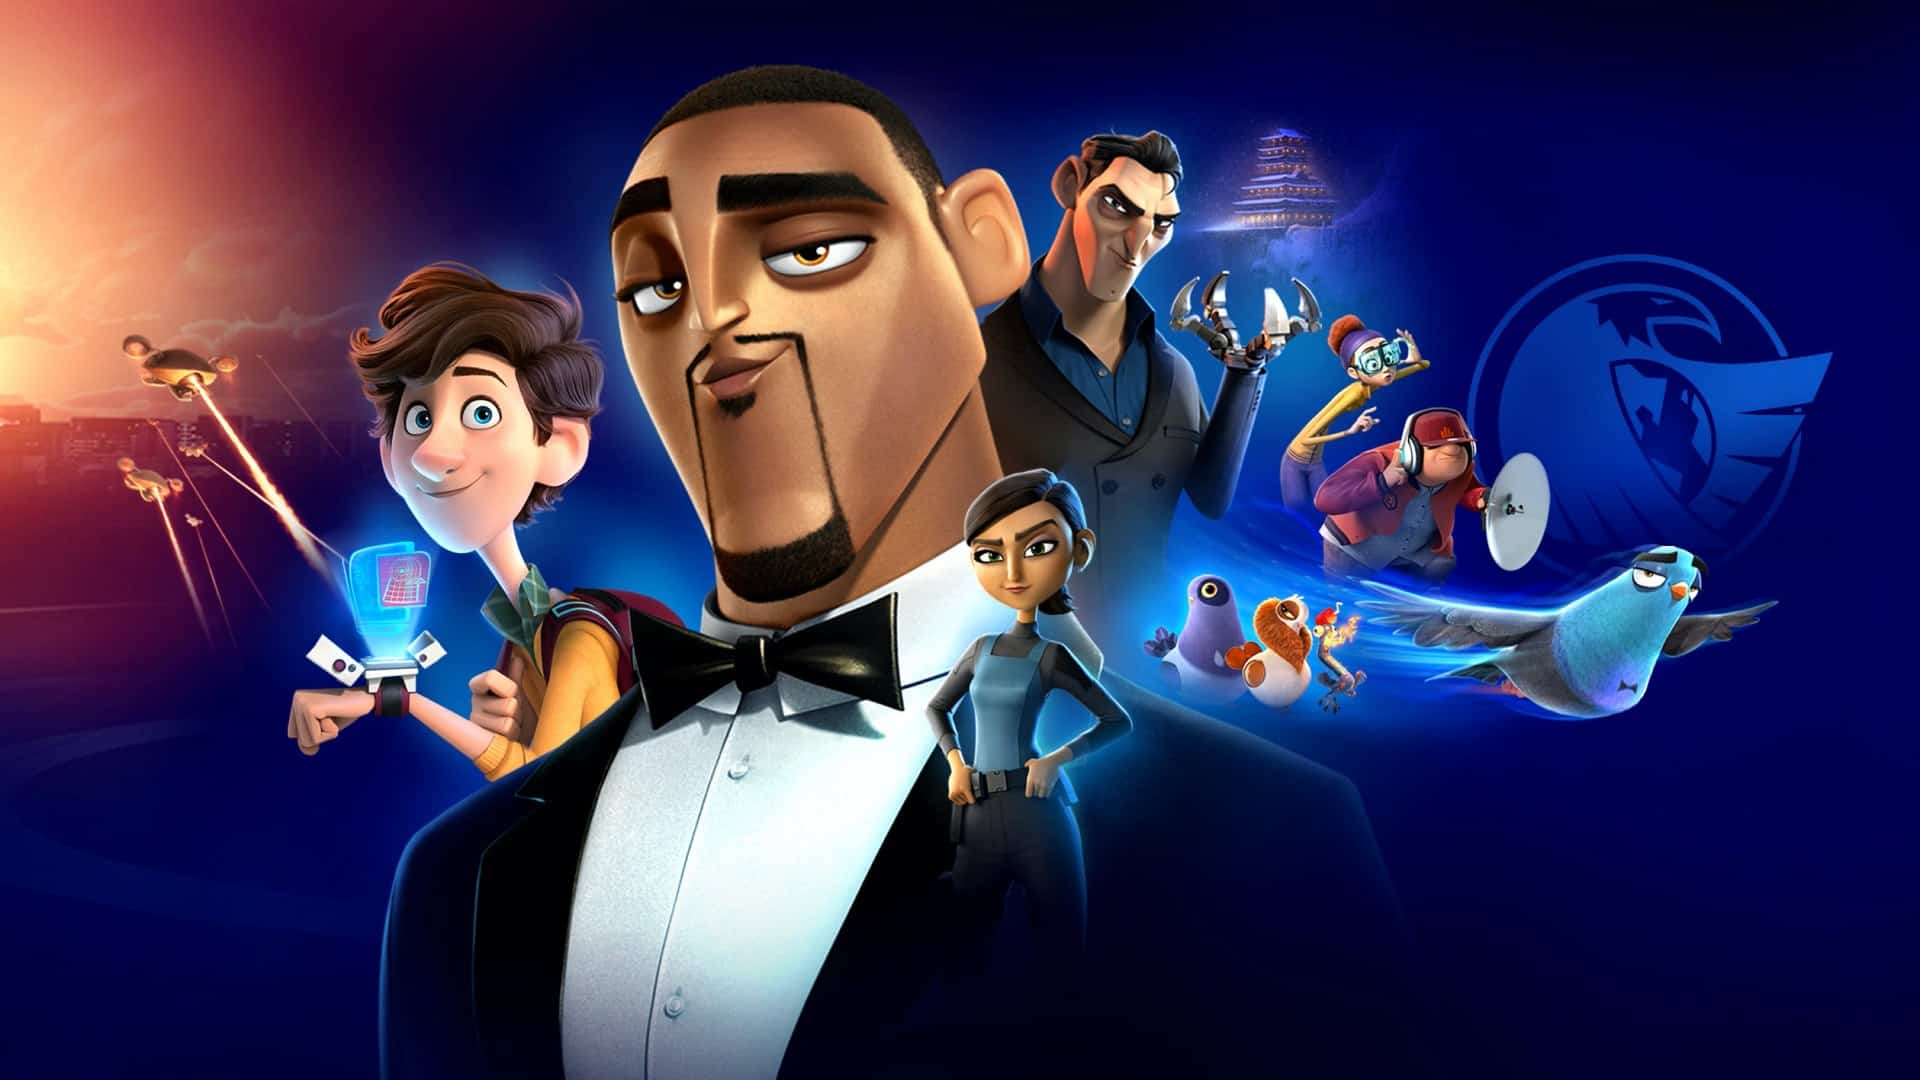 Spies in Disguise (2019) 1080p Bluray Google Drive